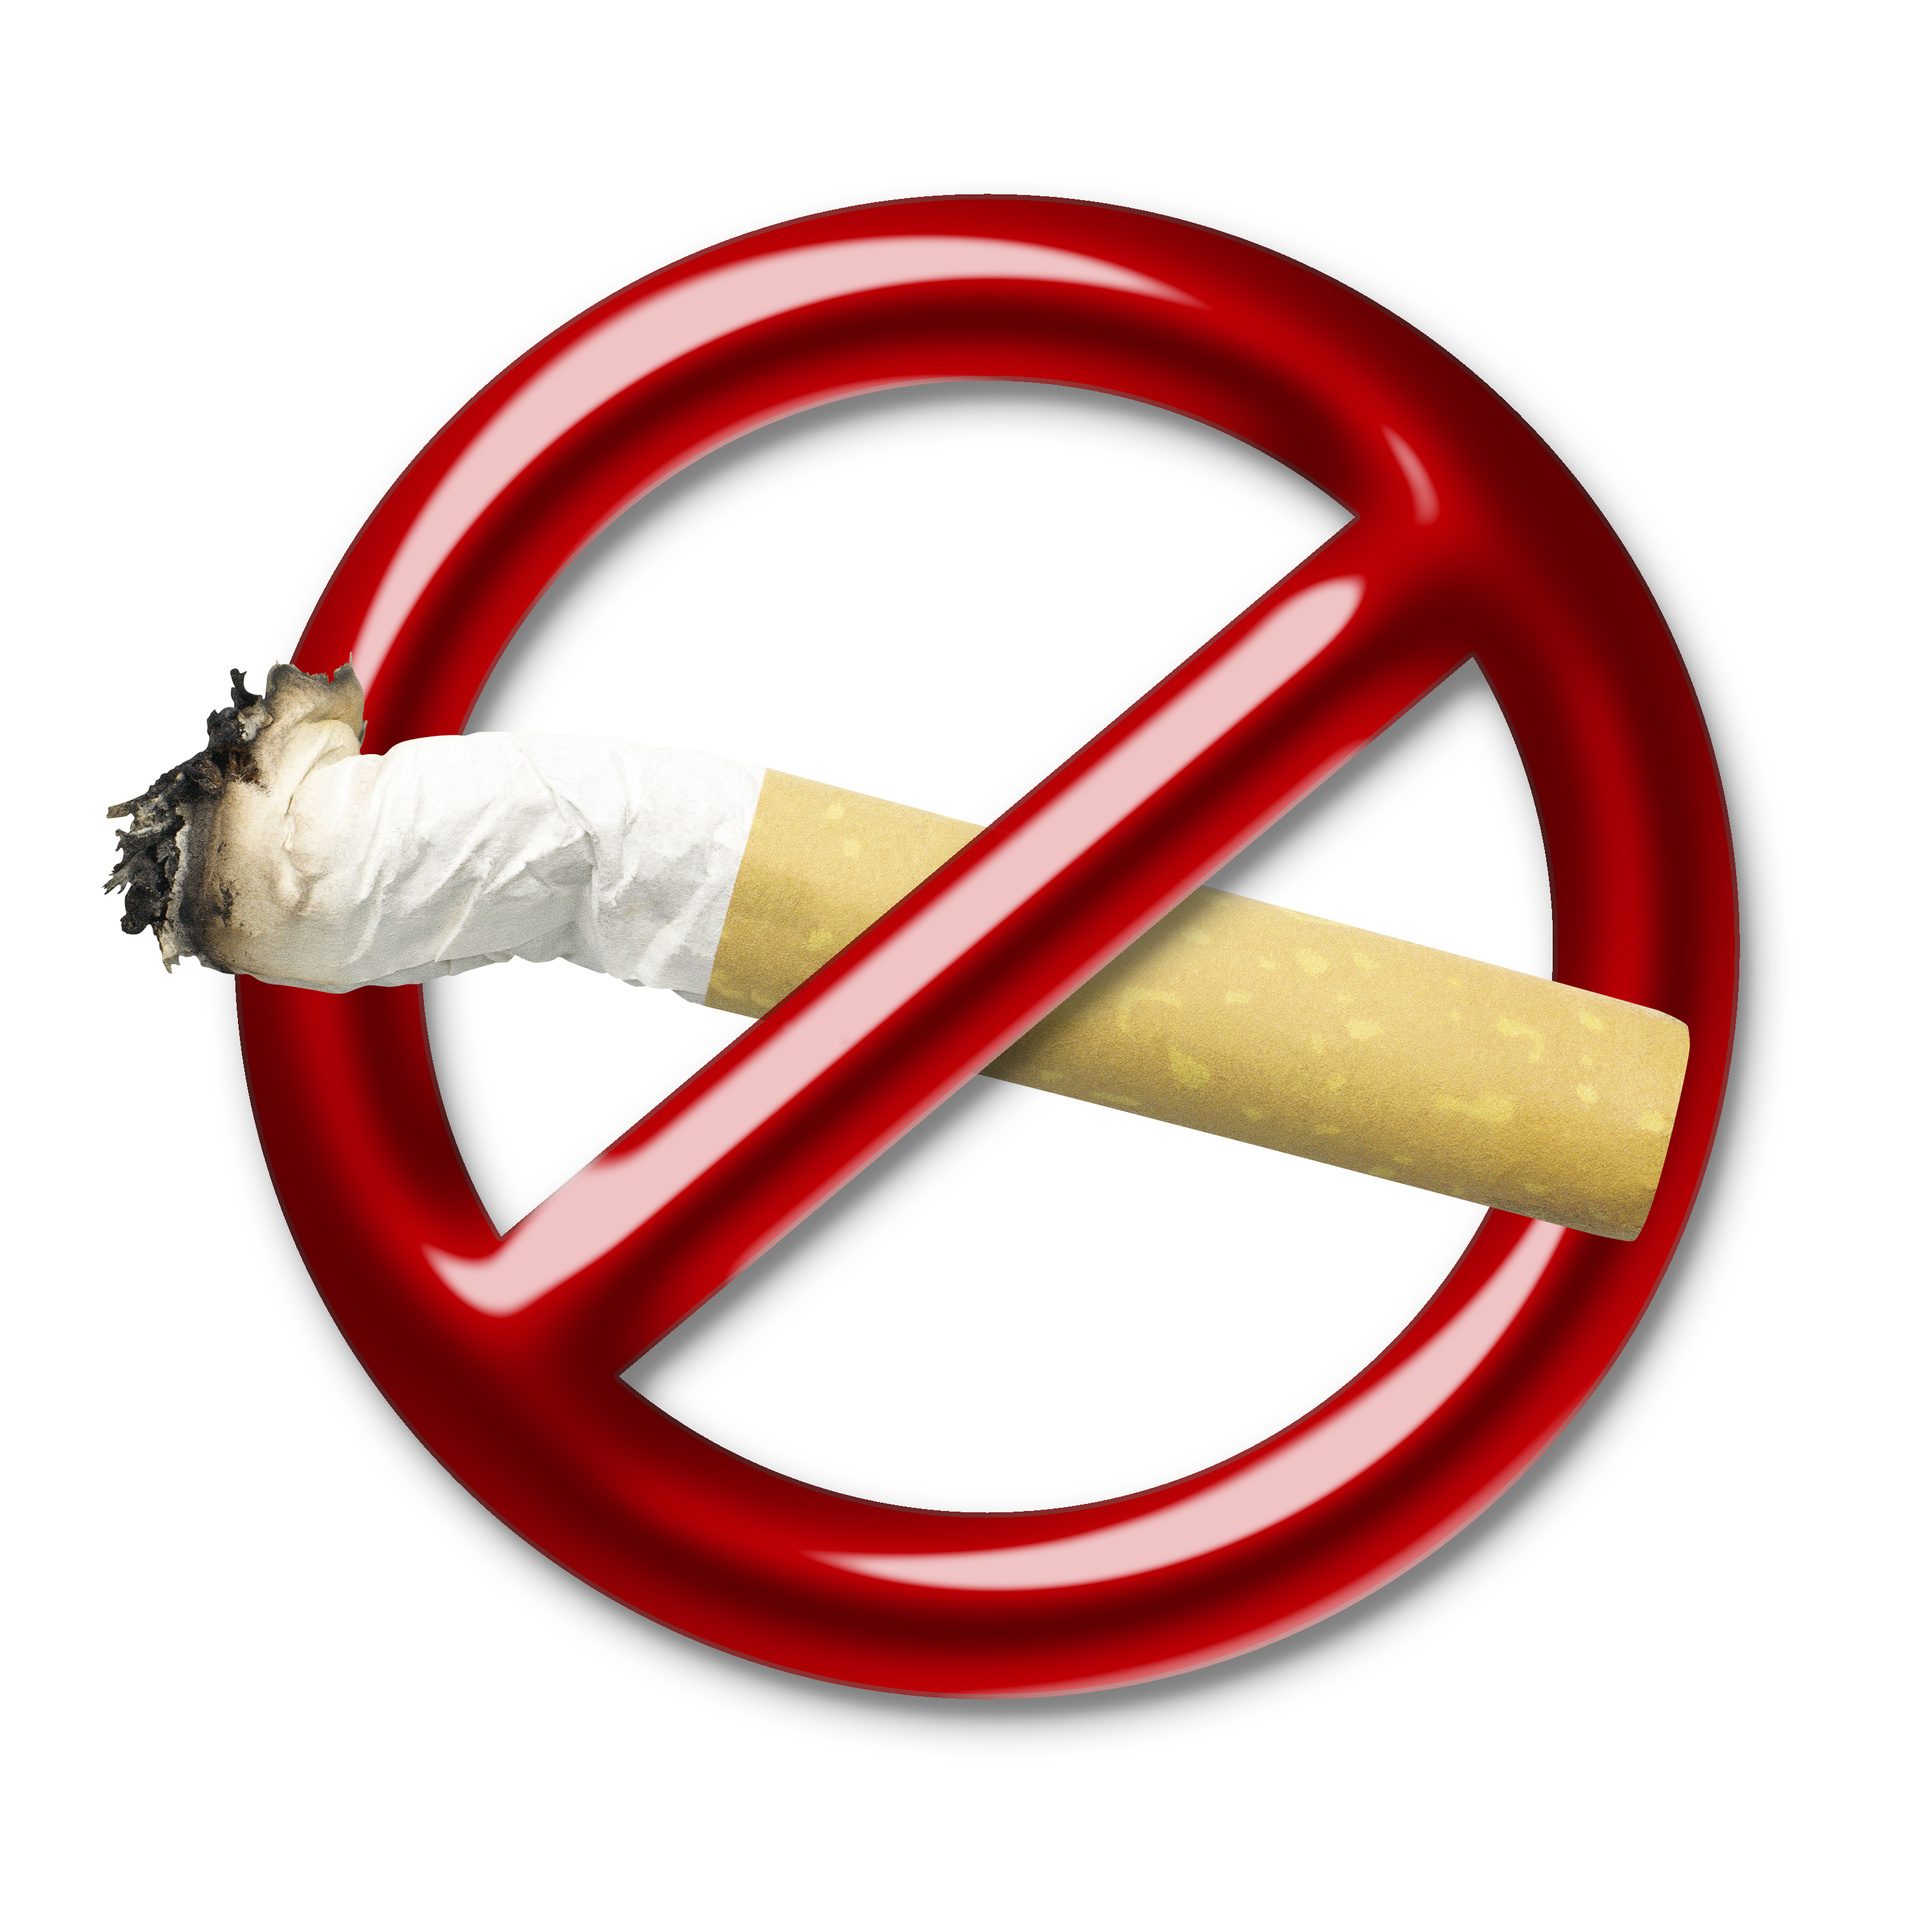 10 Stop Smoking Sign Free Cliparts That You Can Download To You